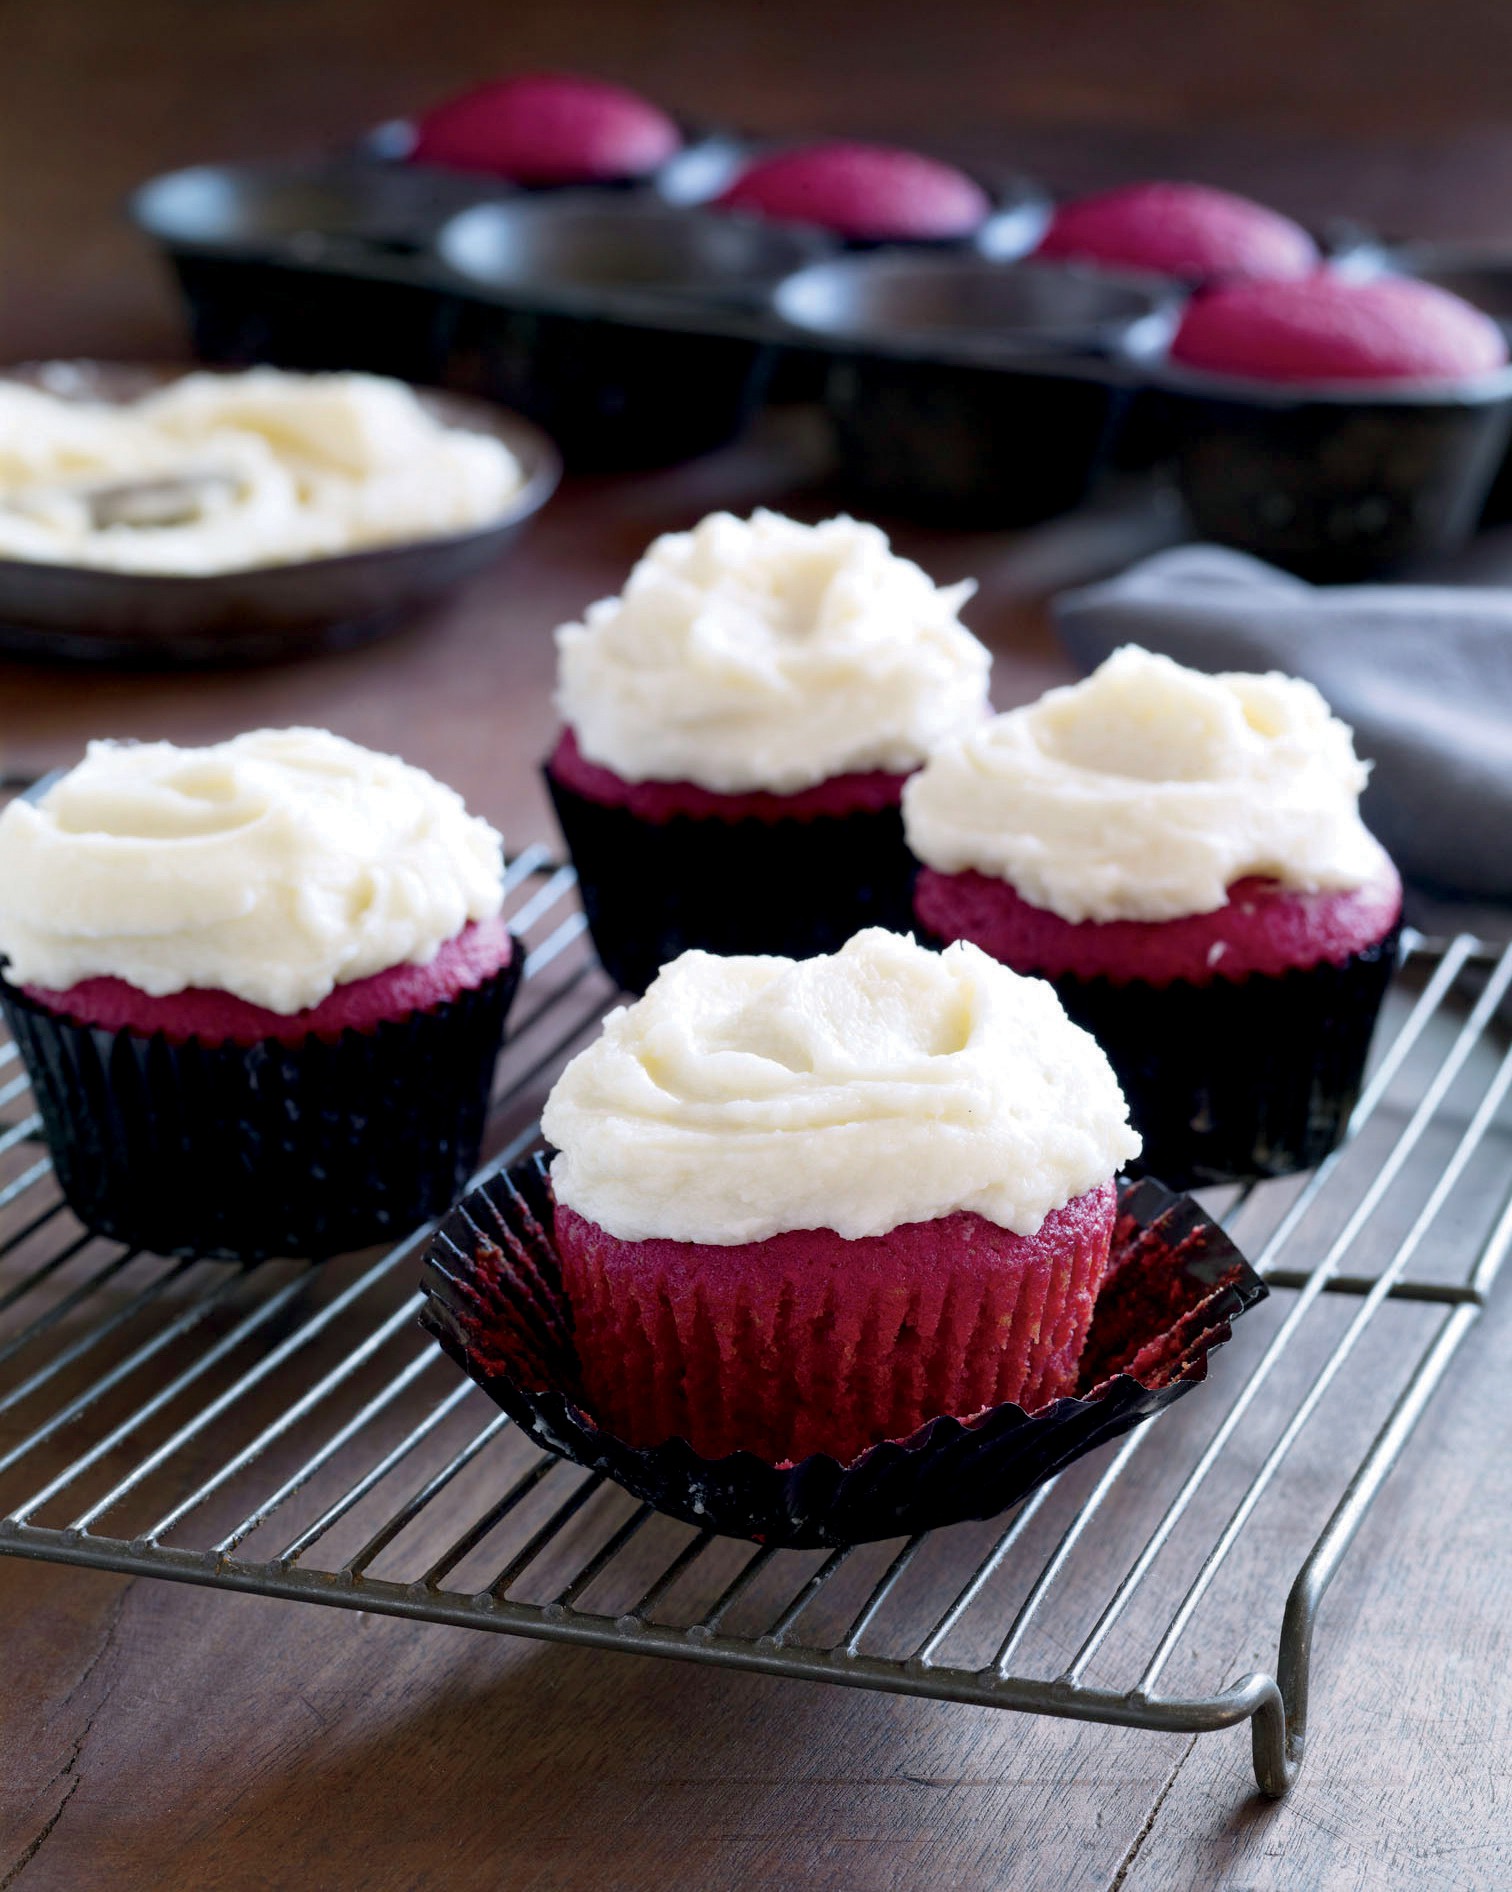 Red Velvet Cupcakes with Orange Buttercream from Roots: The Definitive Compendium by Diane Morgan